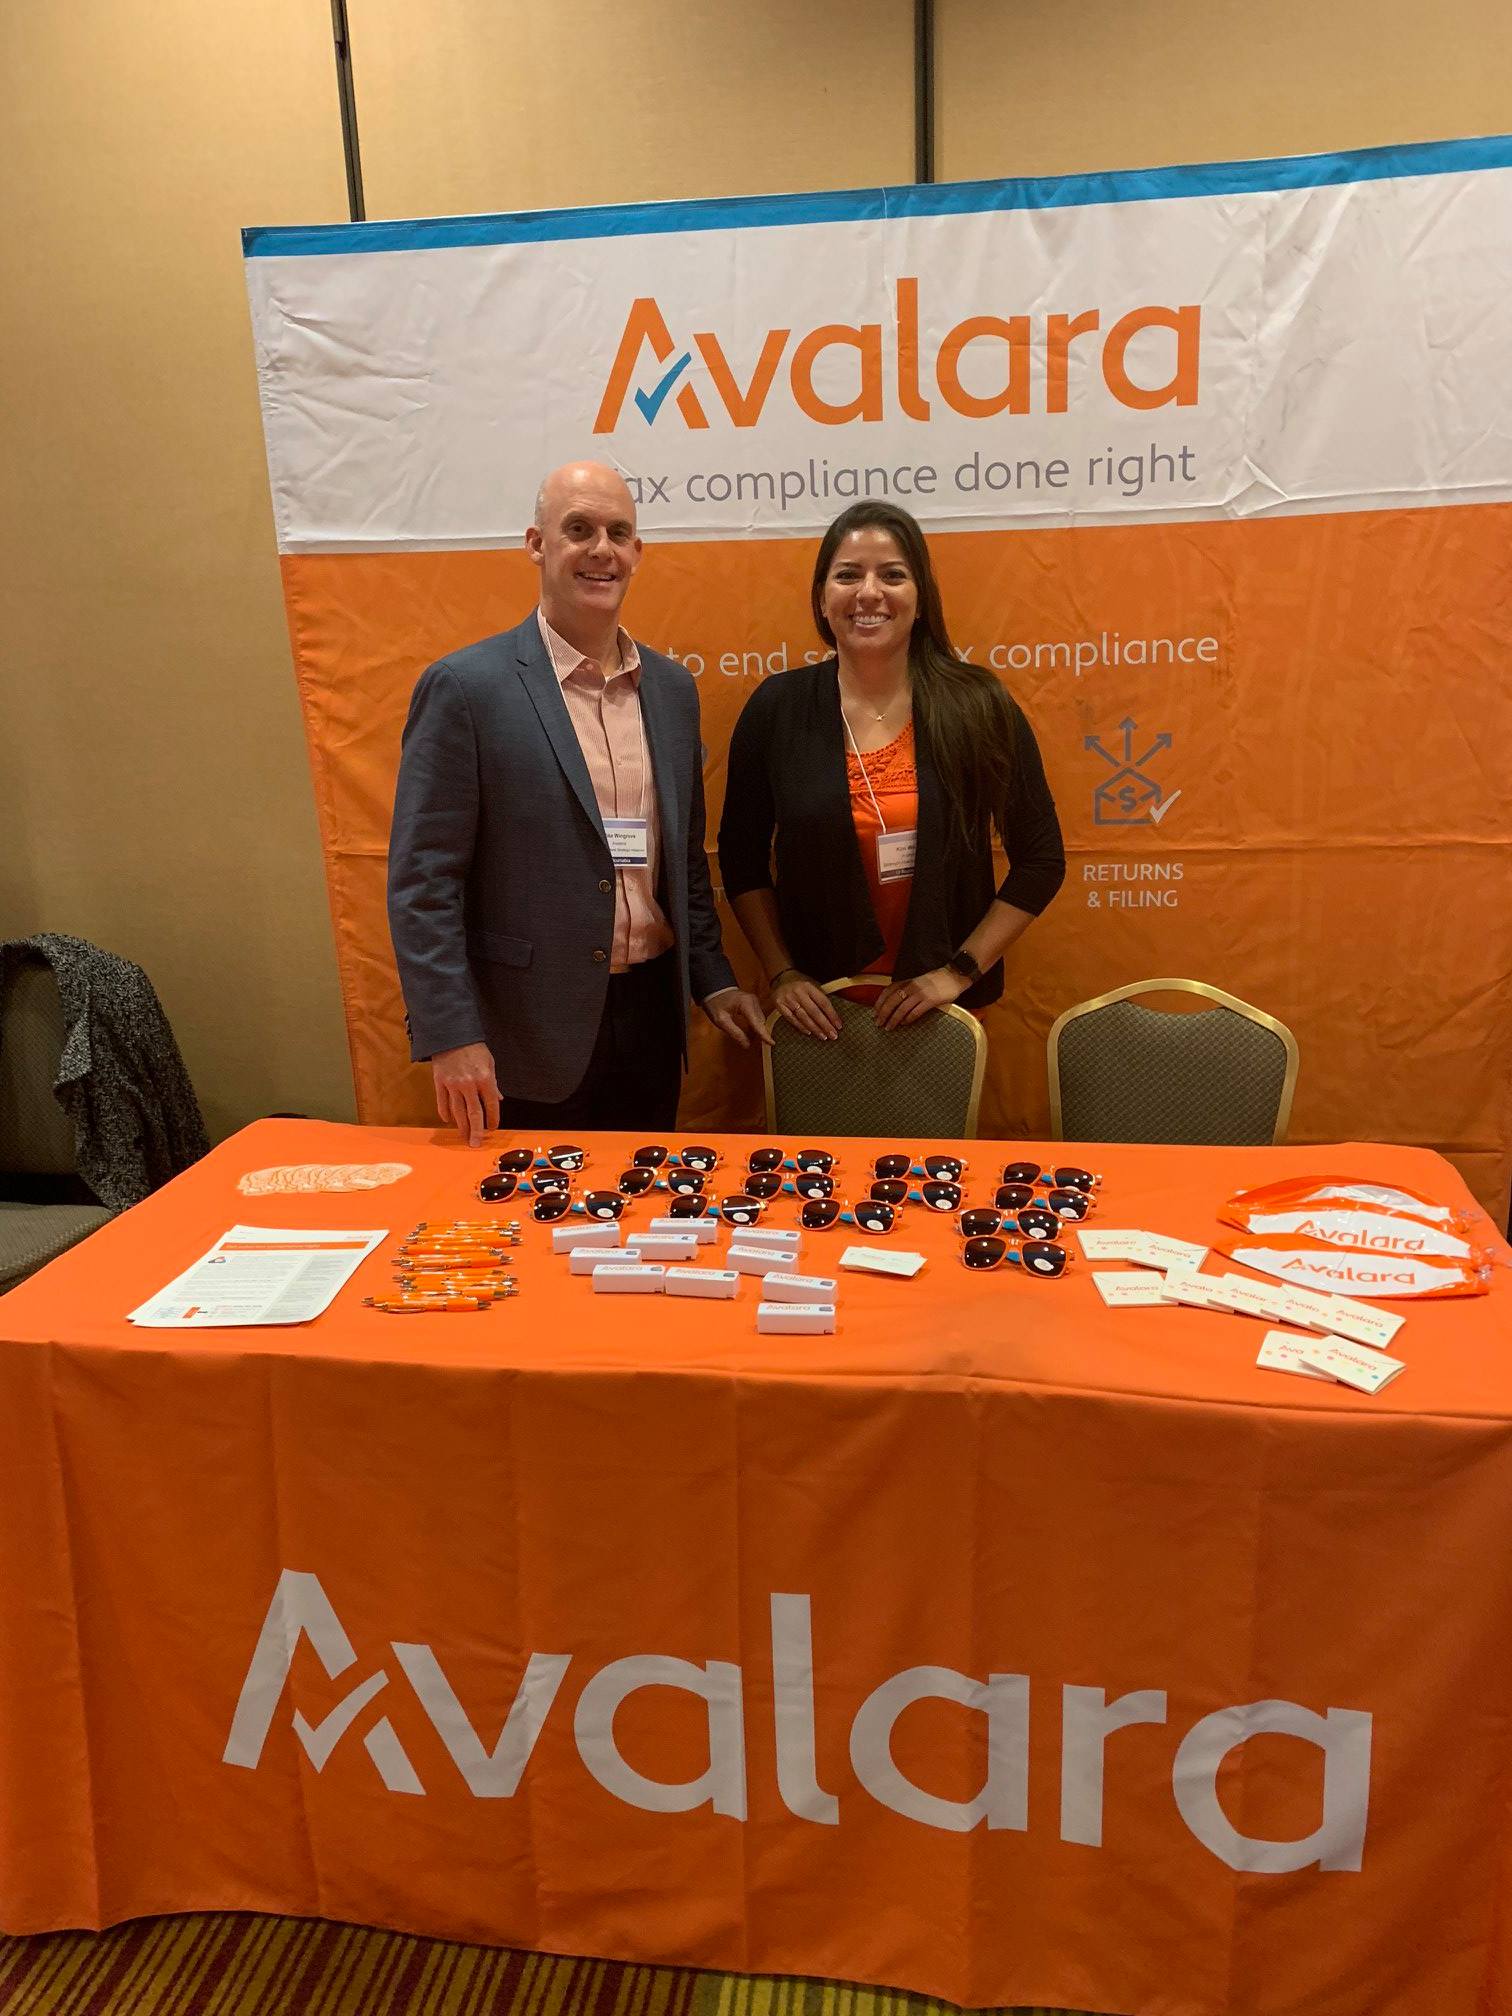 A few members from the Avalara team at our Launch Event in Bellevue, Washington.